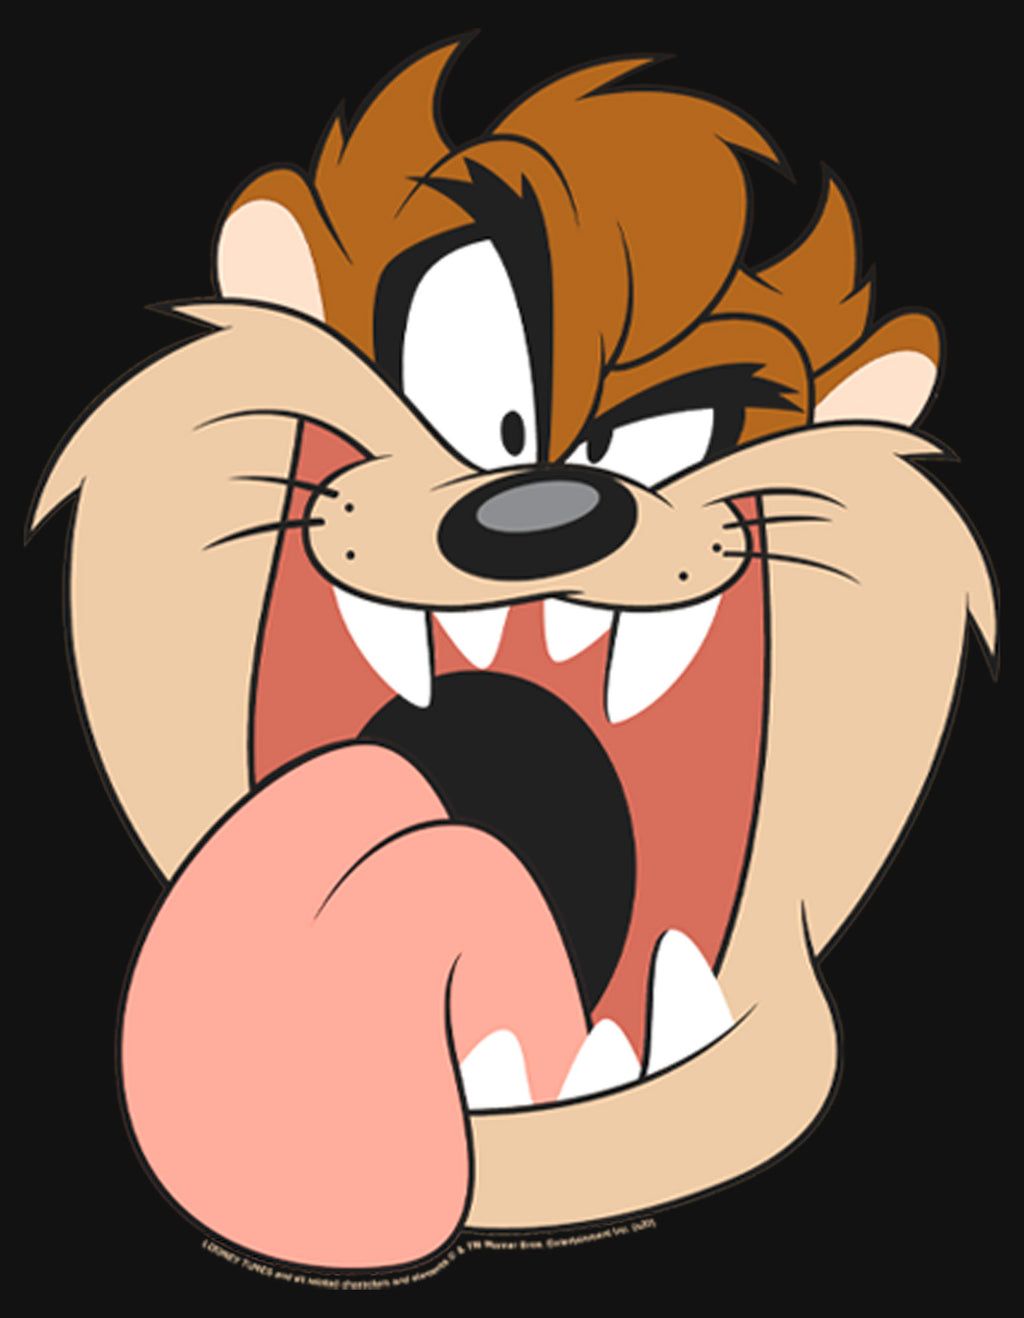 Tazmanian Devil cartoon character with his tongue out - Bugs Bunny, Looney Tunes